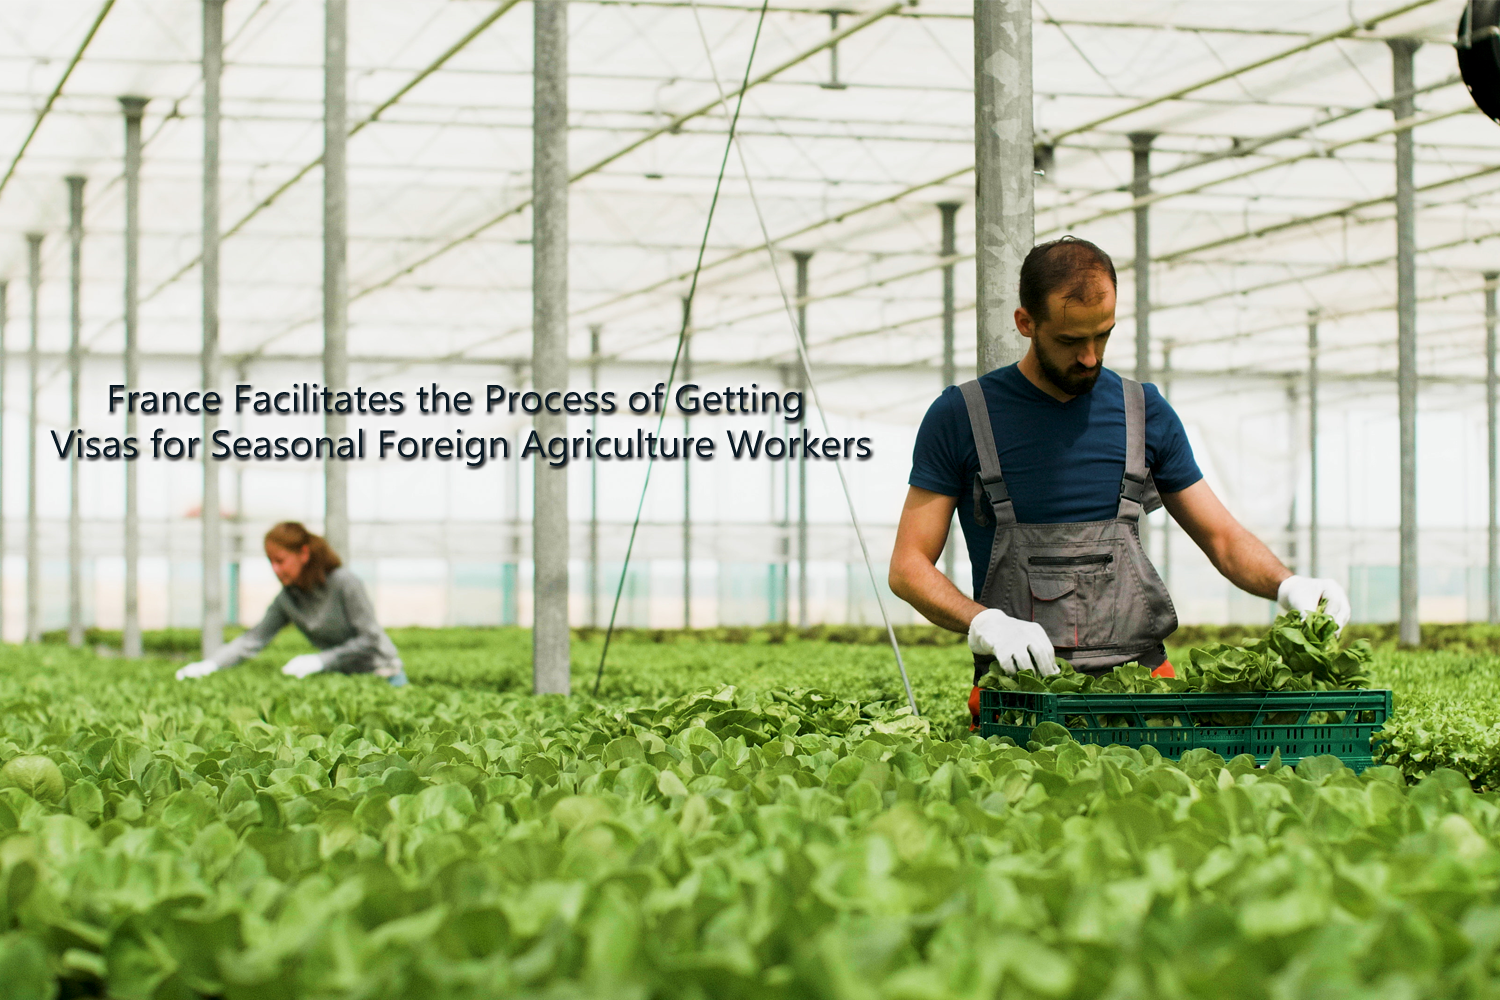 France Facilitates the Process of Getting Visas for Seasonal Foreign Agriculture Workers.